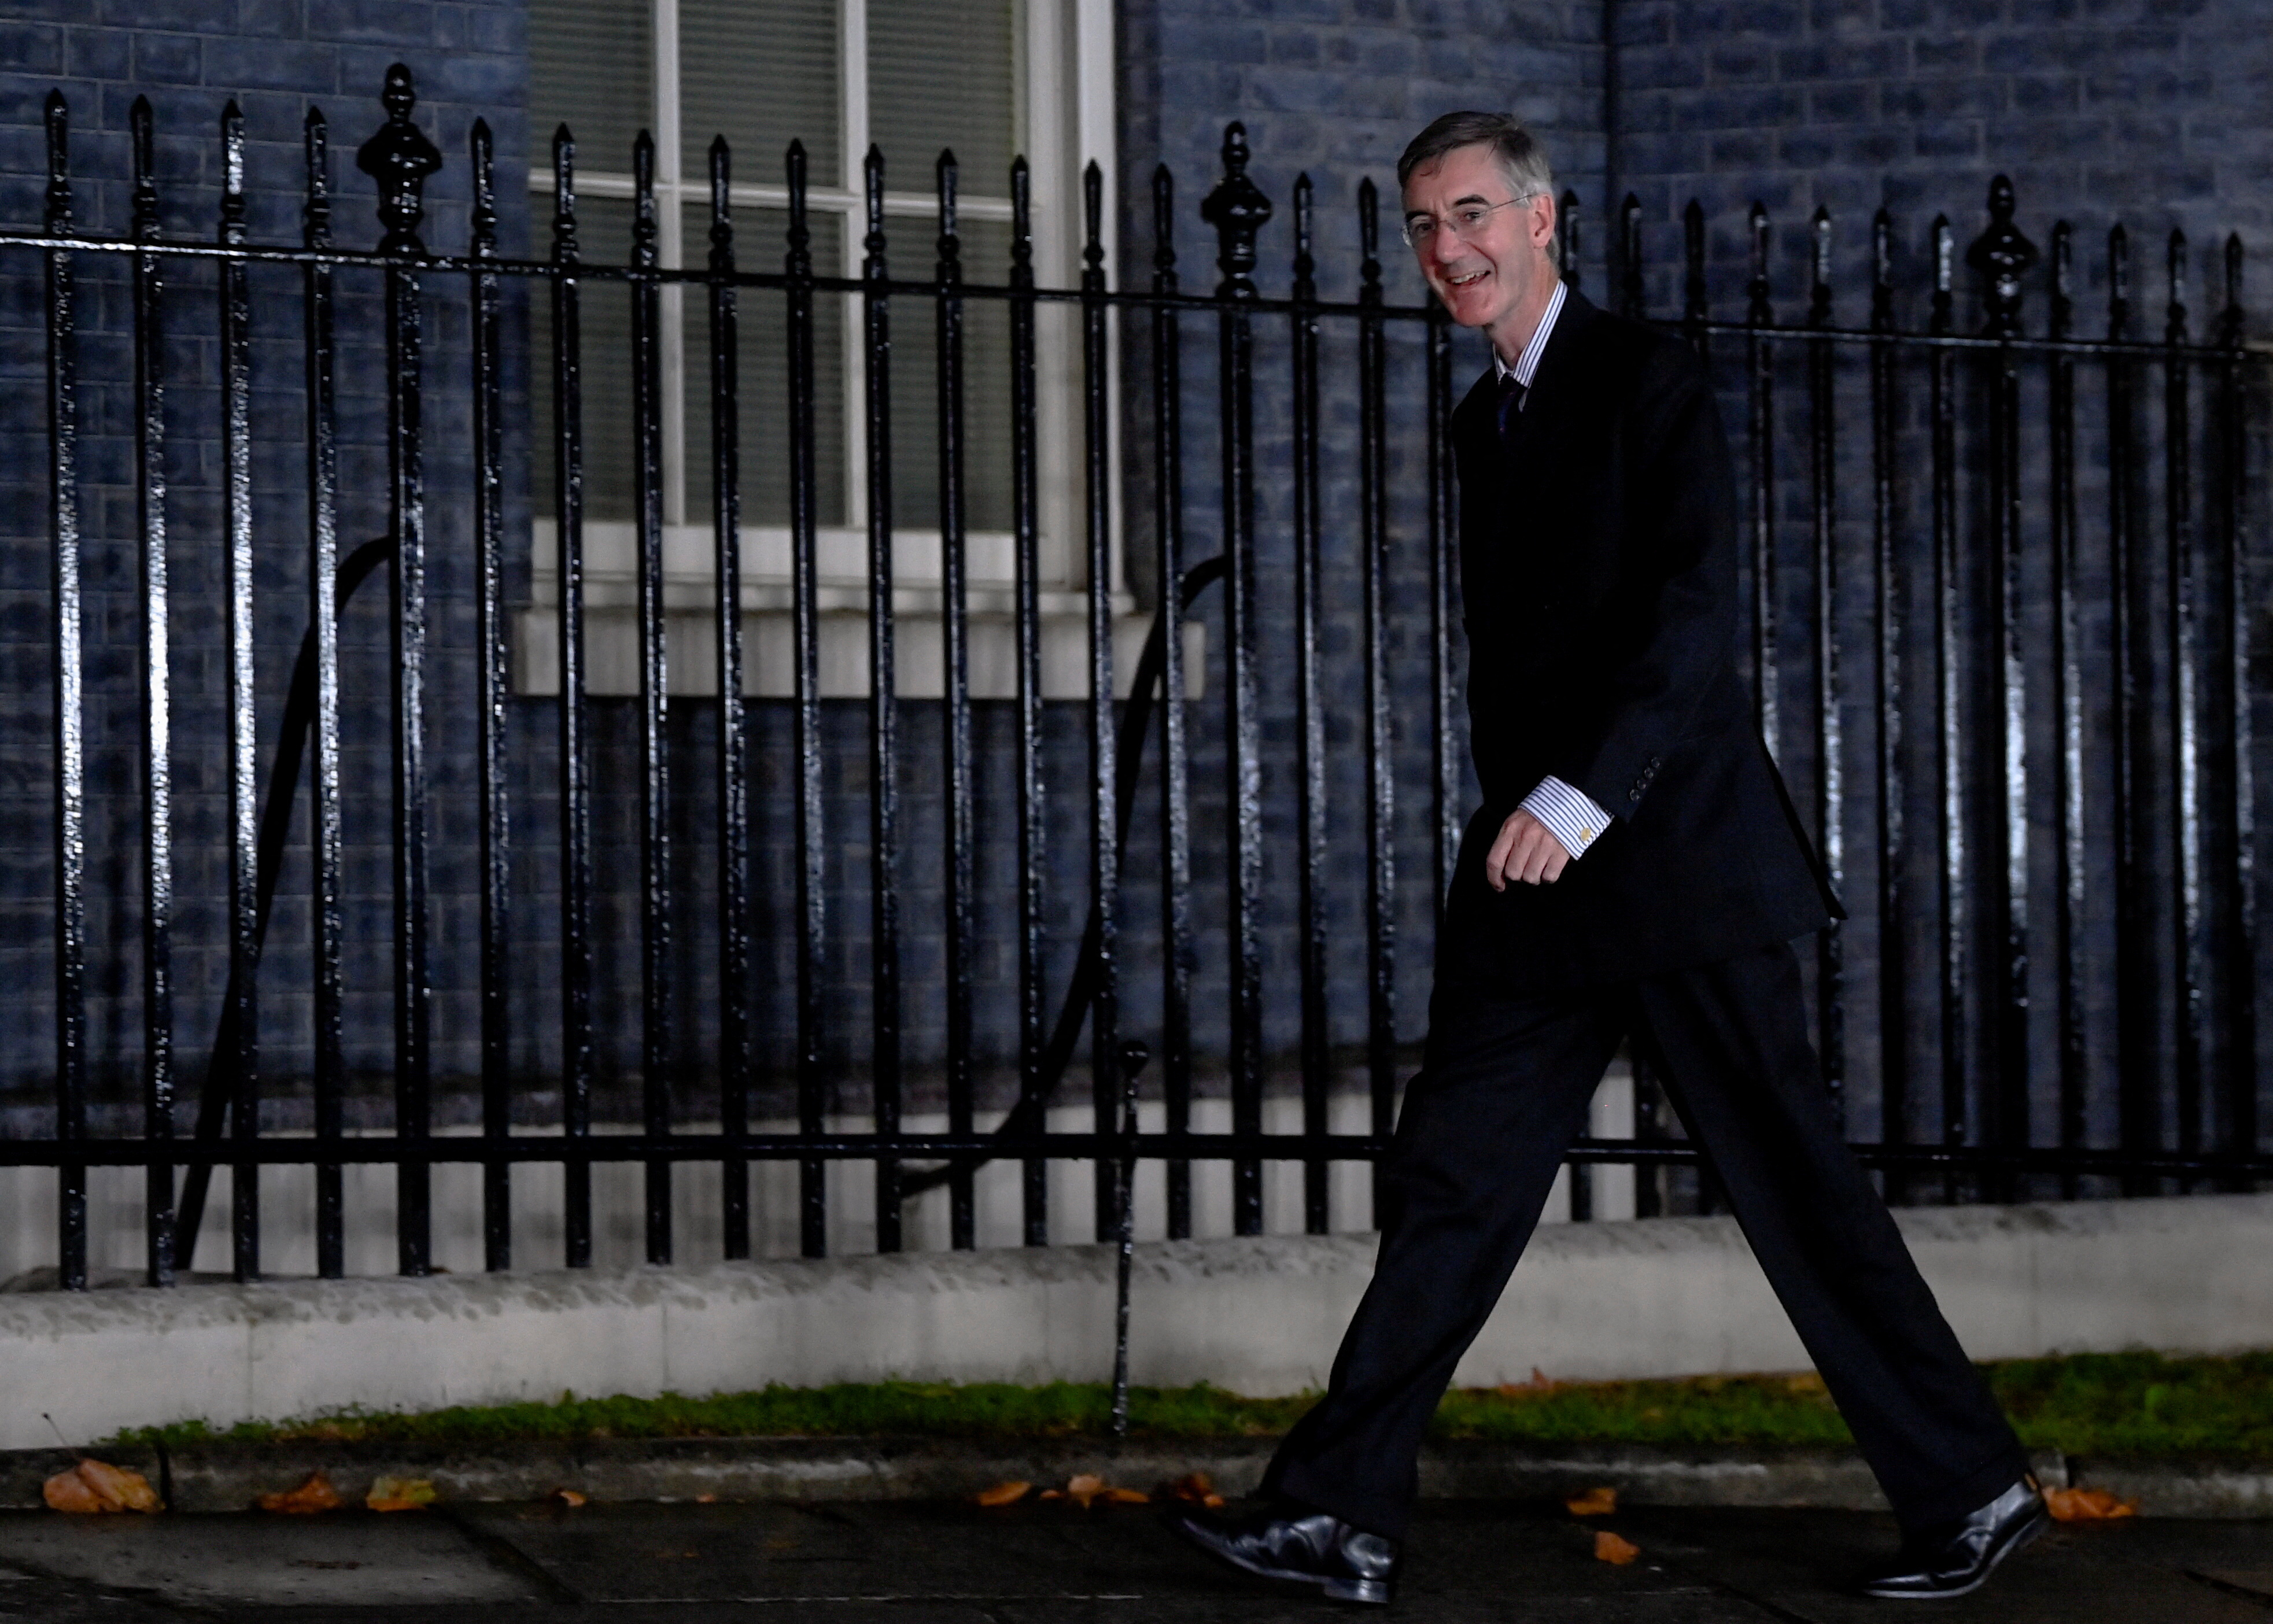 Jacob Rees-Mogg walks outside Number 10 Downing Street in London